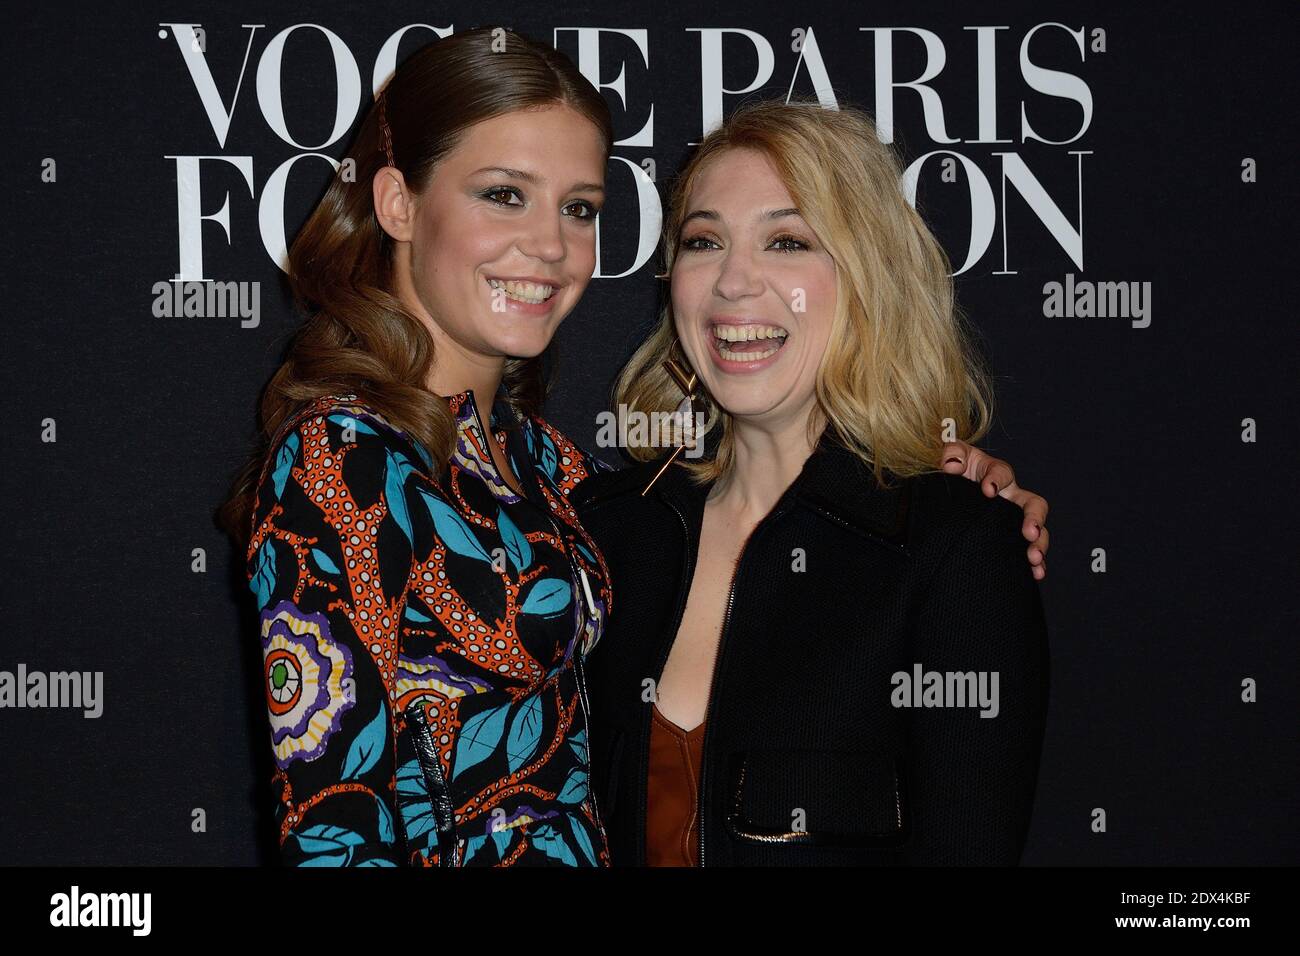 Adele Exarchopoulos and Camille Seydoux attending the Vogue